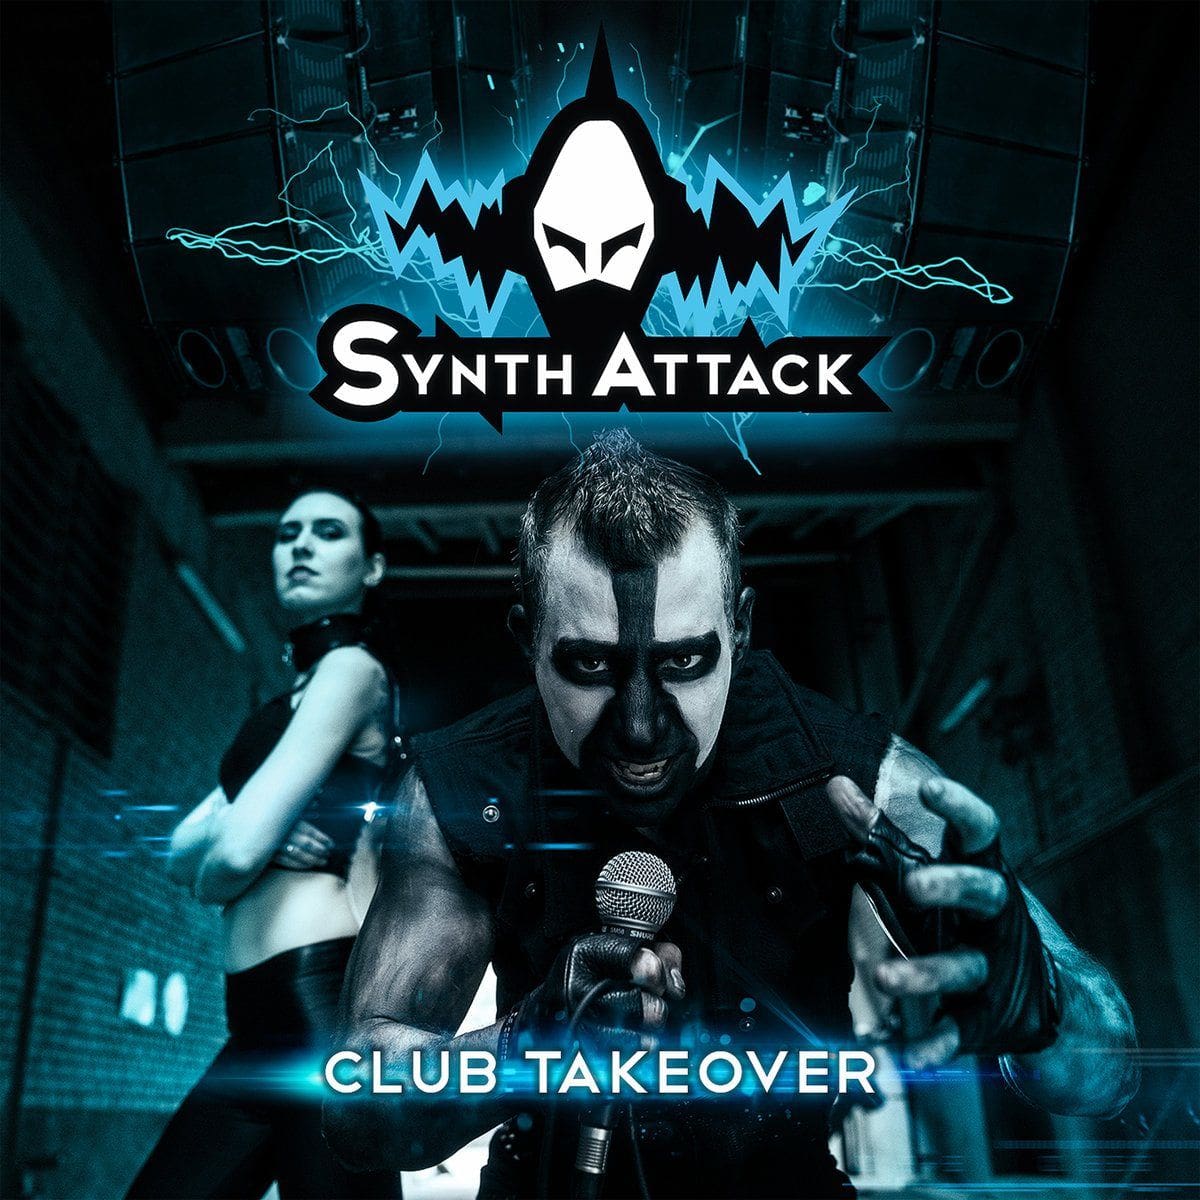 Synthattack – Club Takeover